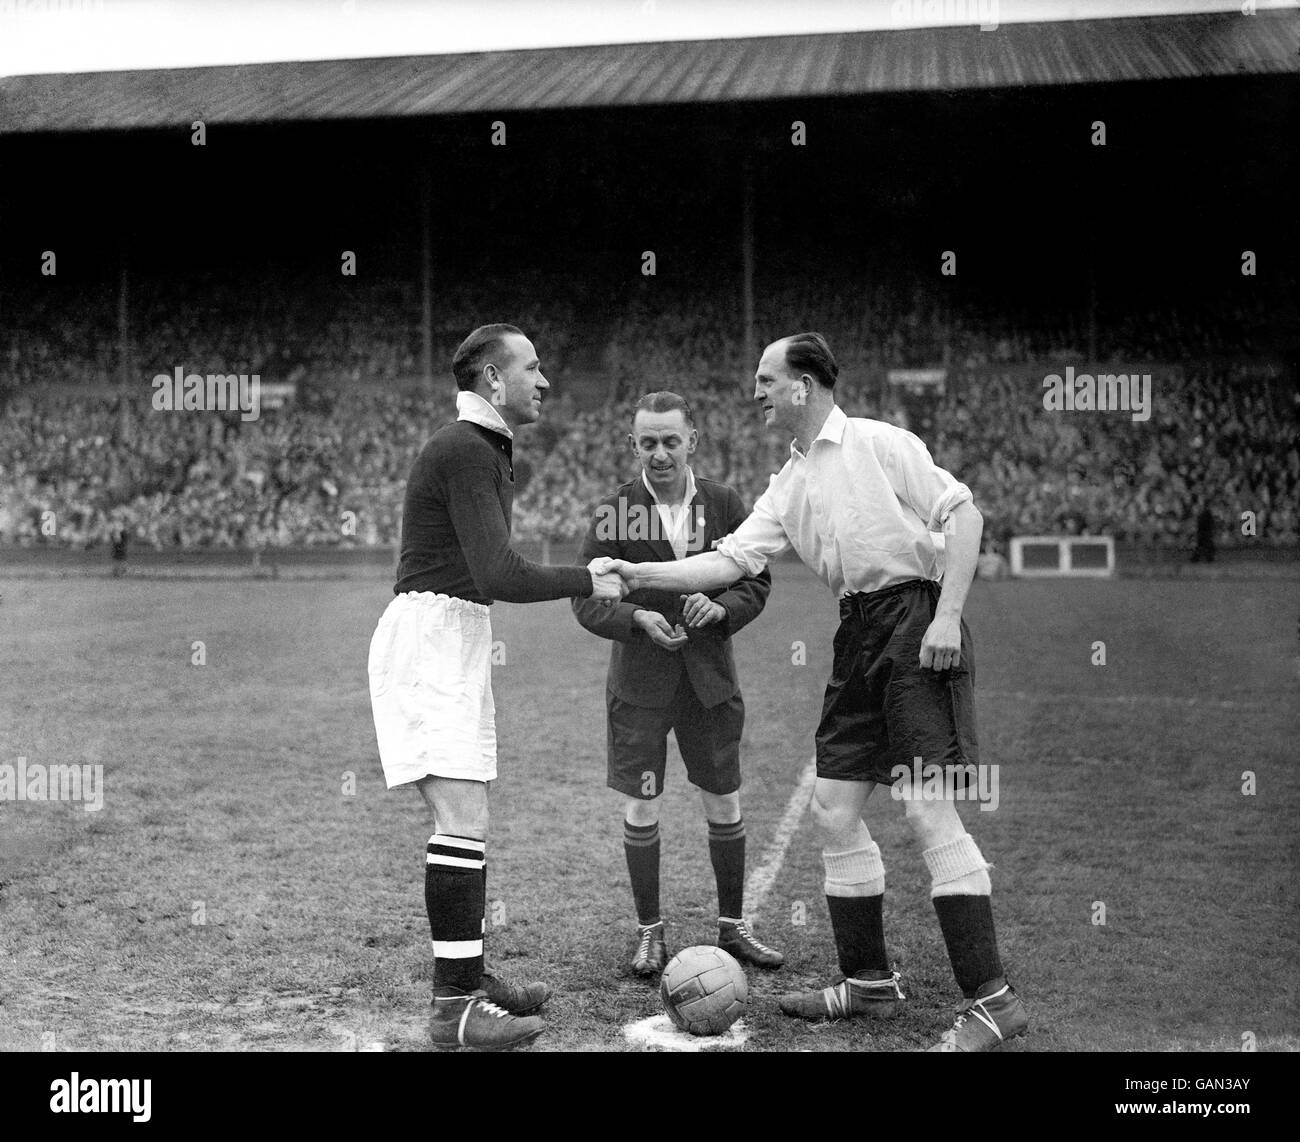 World War Two - UK & Commonwealth - Home Front - Soccer - Wartime International - England v Scotland - Wembley - 1944. The two captains, Scotland's Matt Busby (l) and England's Stan Cullis (r), shake hands before the match, watched by referee WE Wood (c) Stock Photo